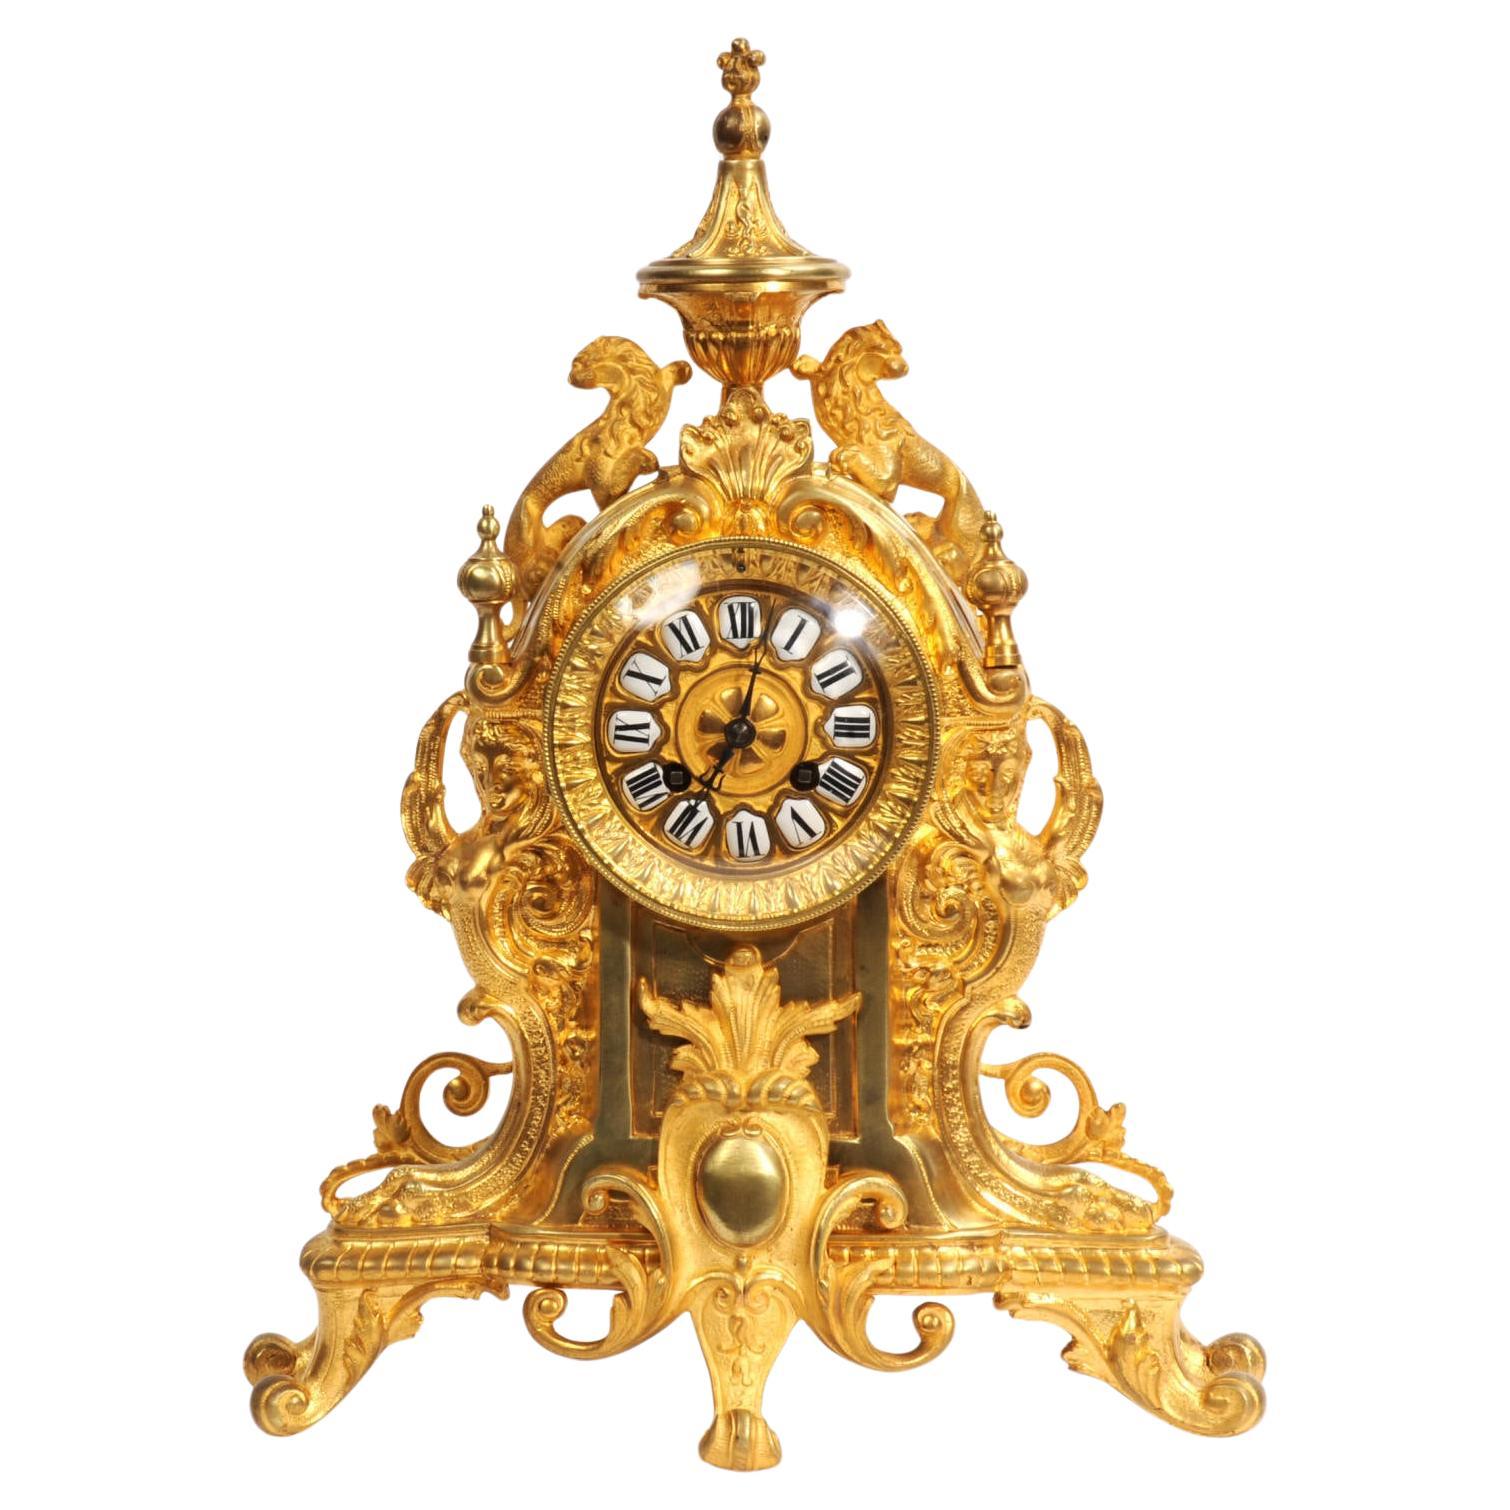 Antique French Ormolu Clock - Lions Rampant - overhauled and tested